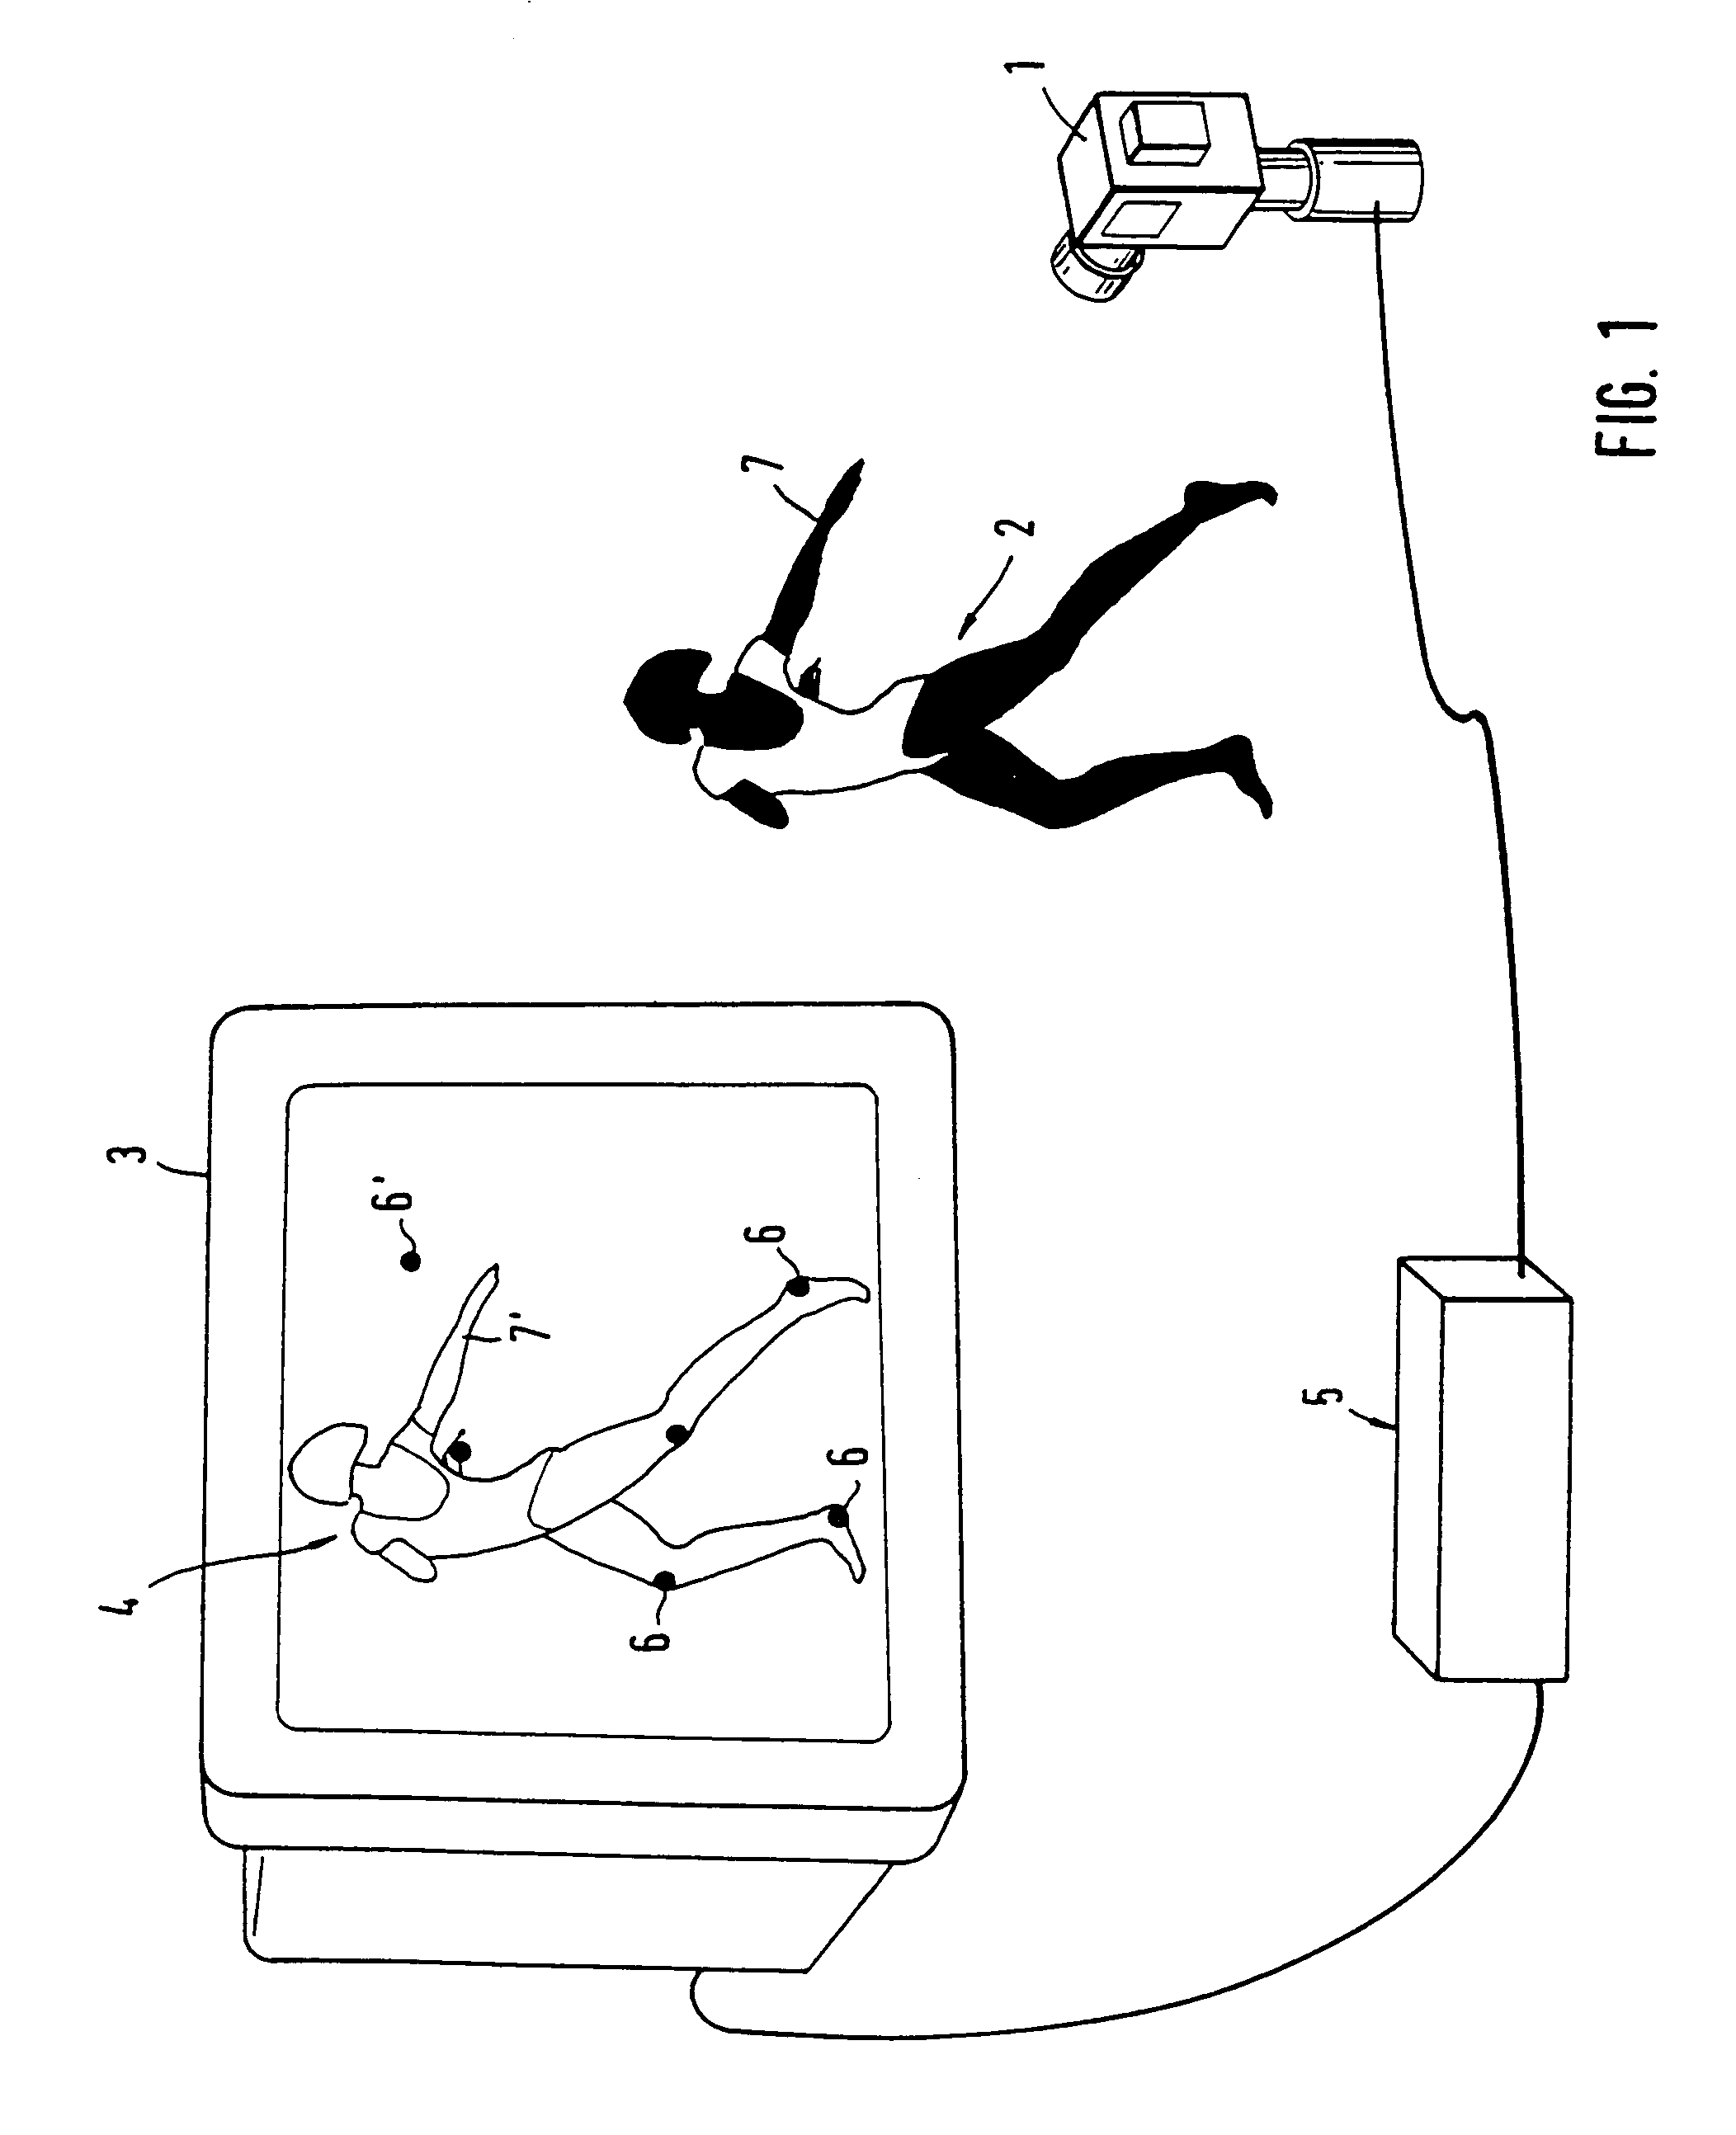 System for enabling a moving person to control body movements to be performed by said person